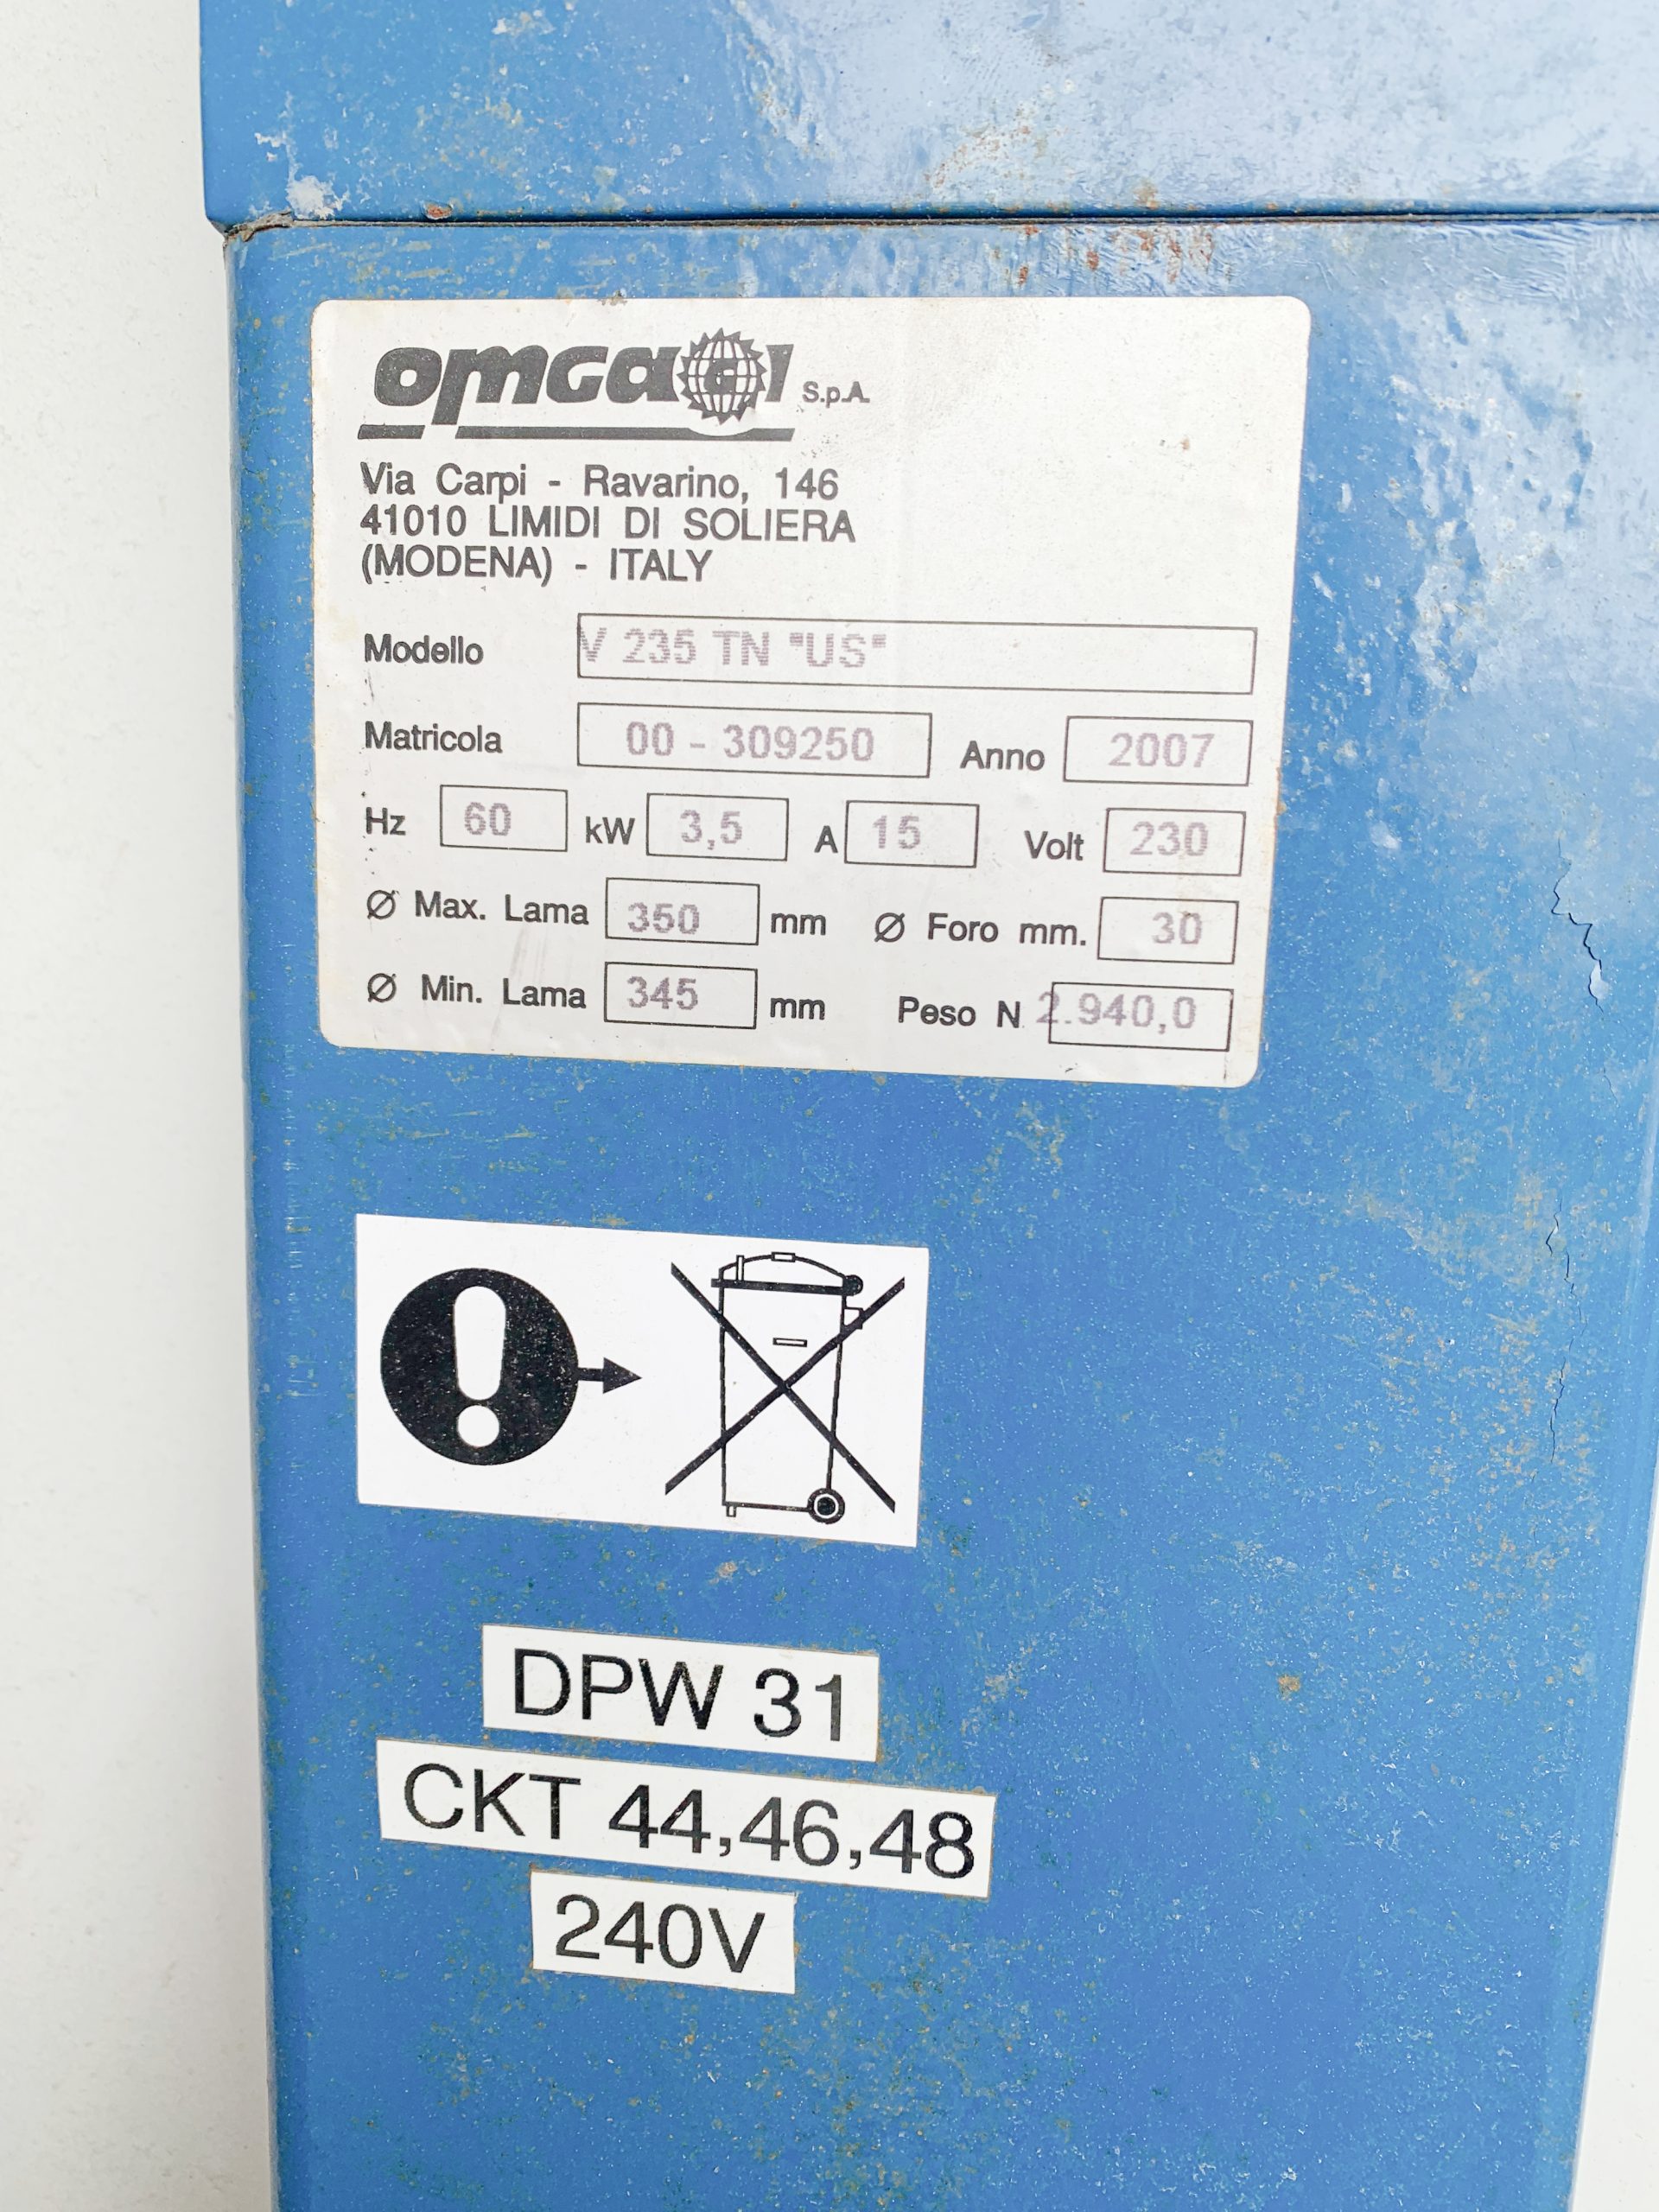 OMGA V235 Double Miter Saw (Used) Item # UE-042022A (New York)